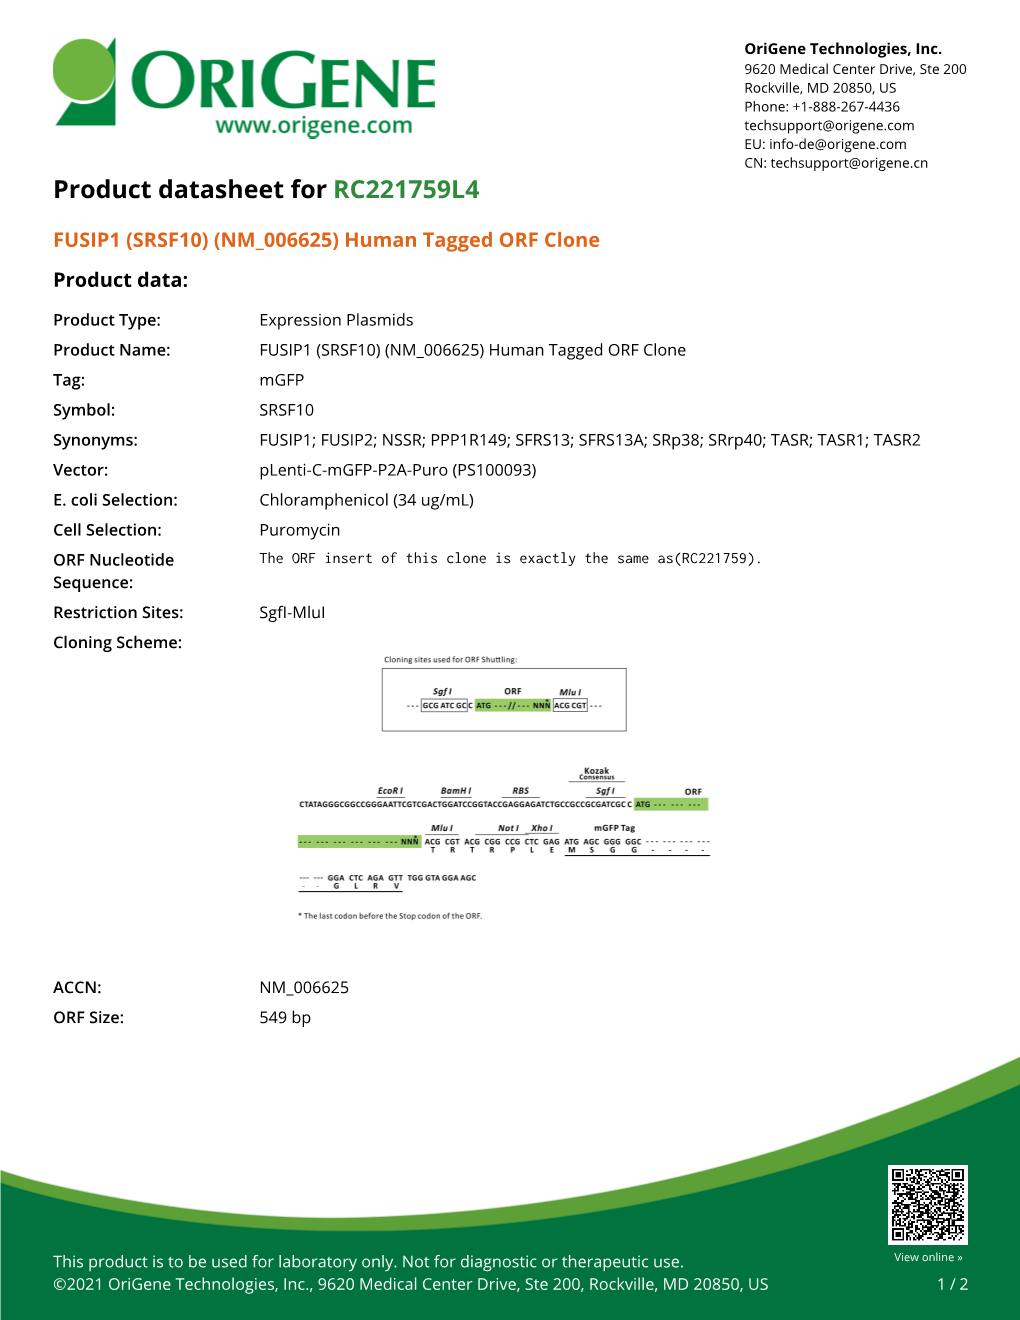 FUSIP1 (SRSF10) (NM 006625) Human Tagged ORF Clone Product Data